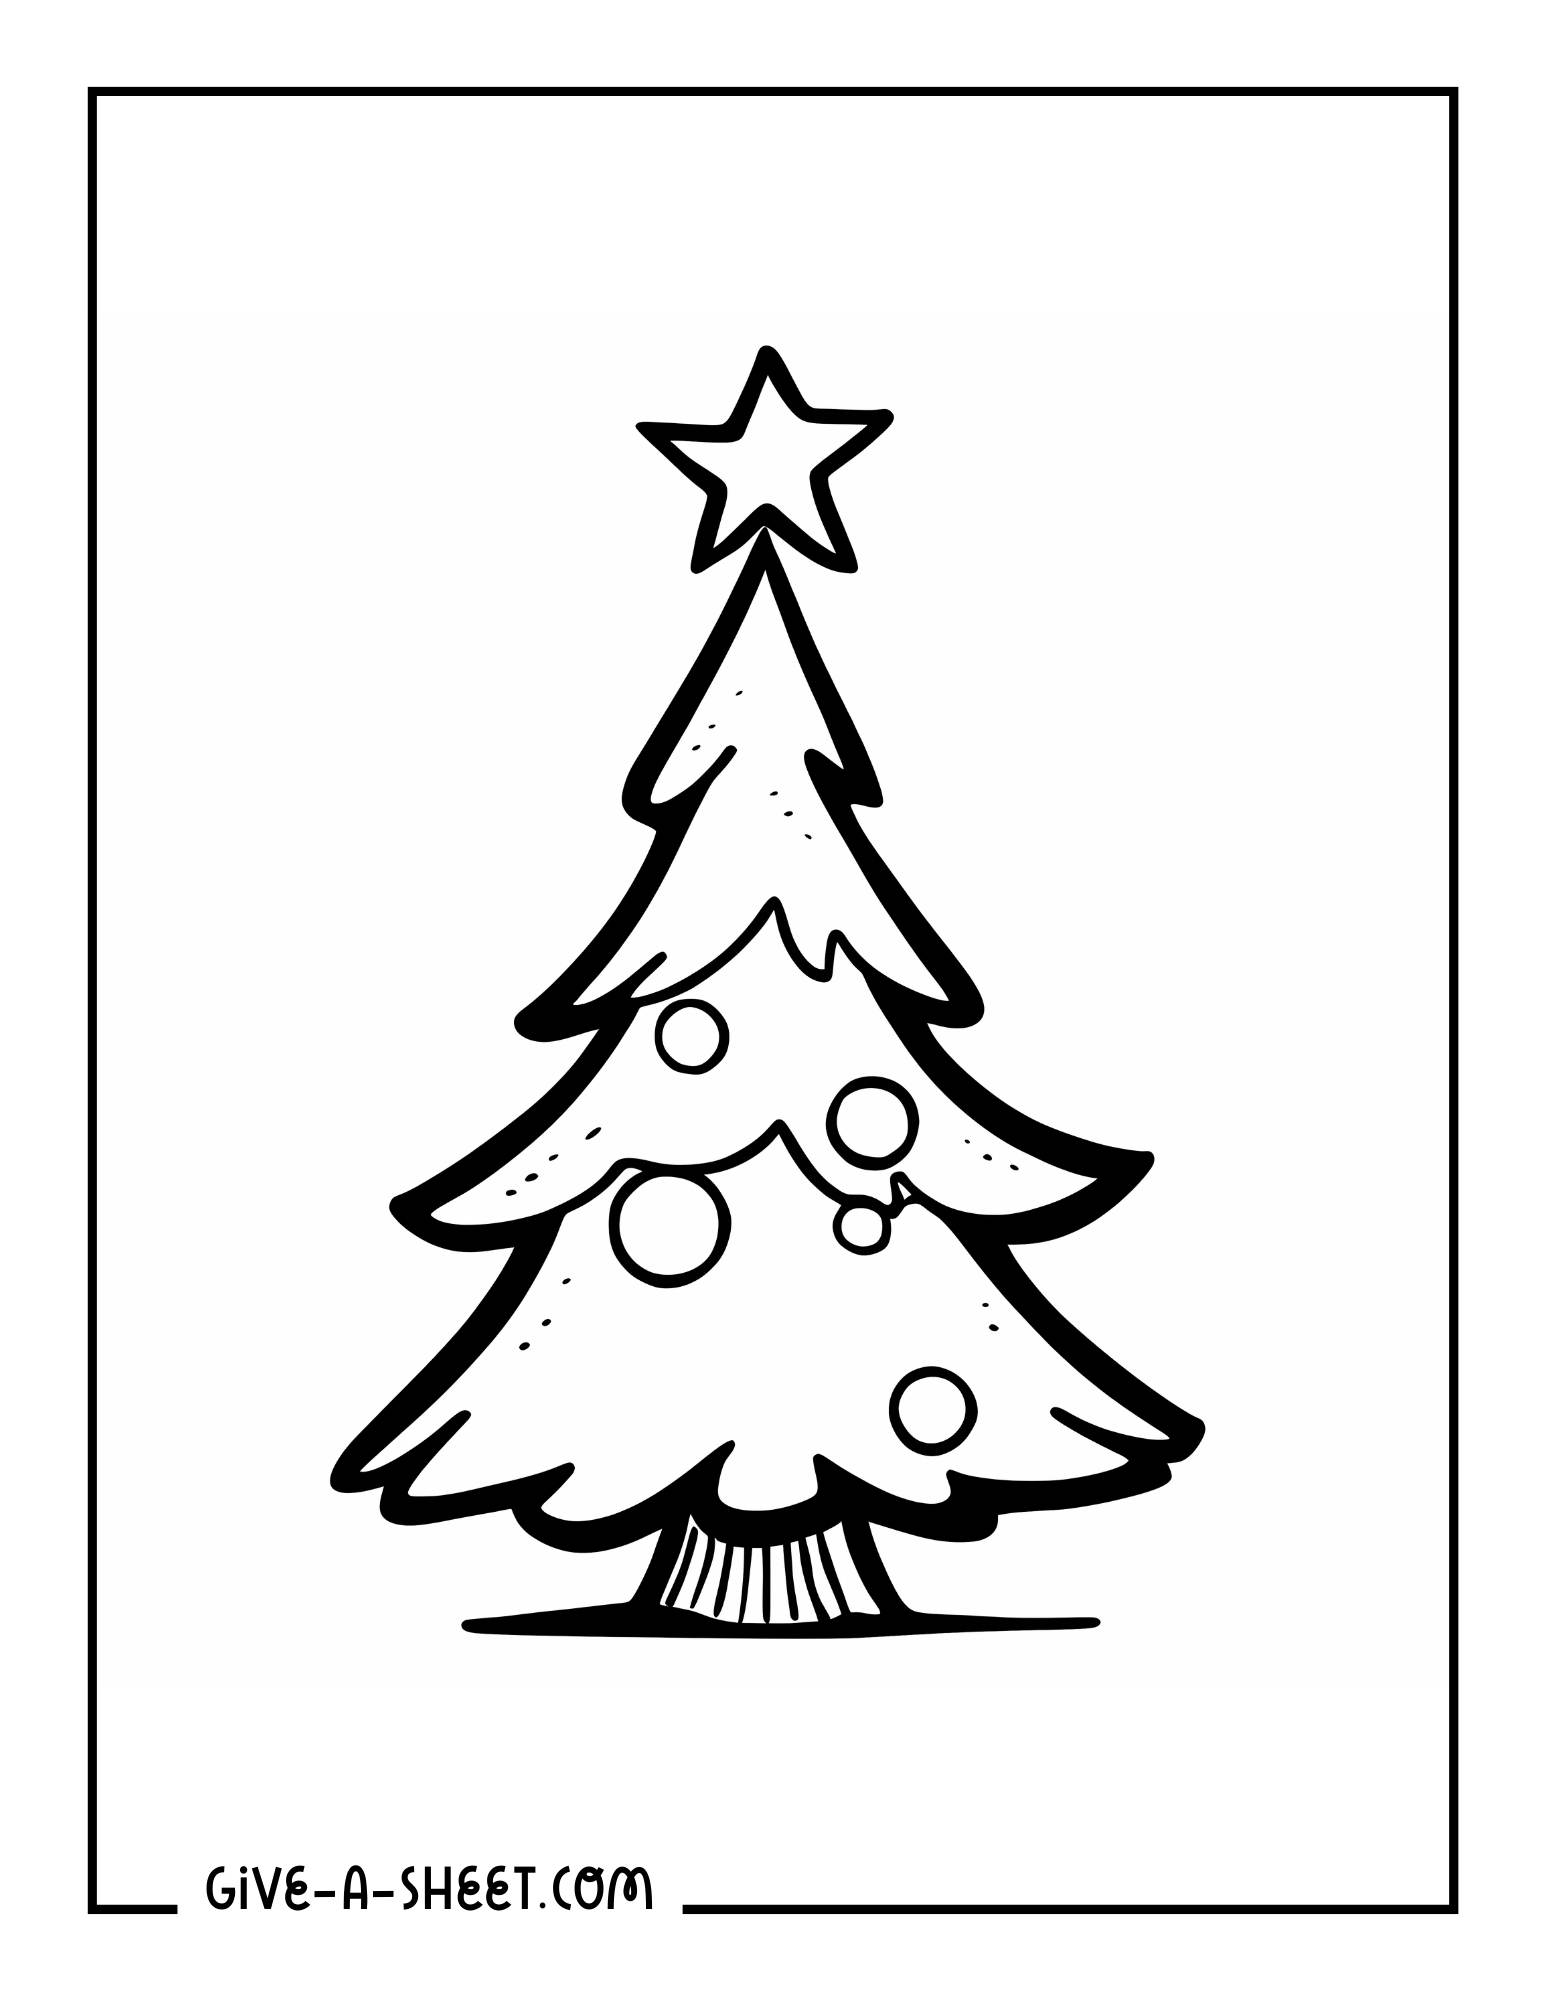 Easy Christmas trees coloring page for kids.